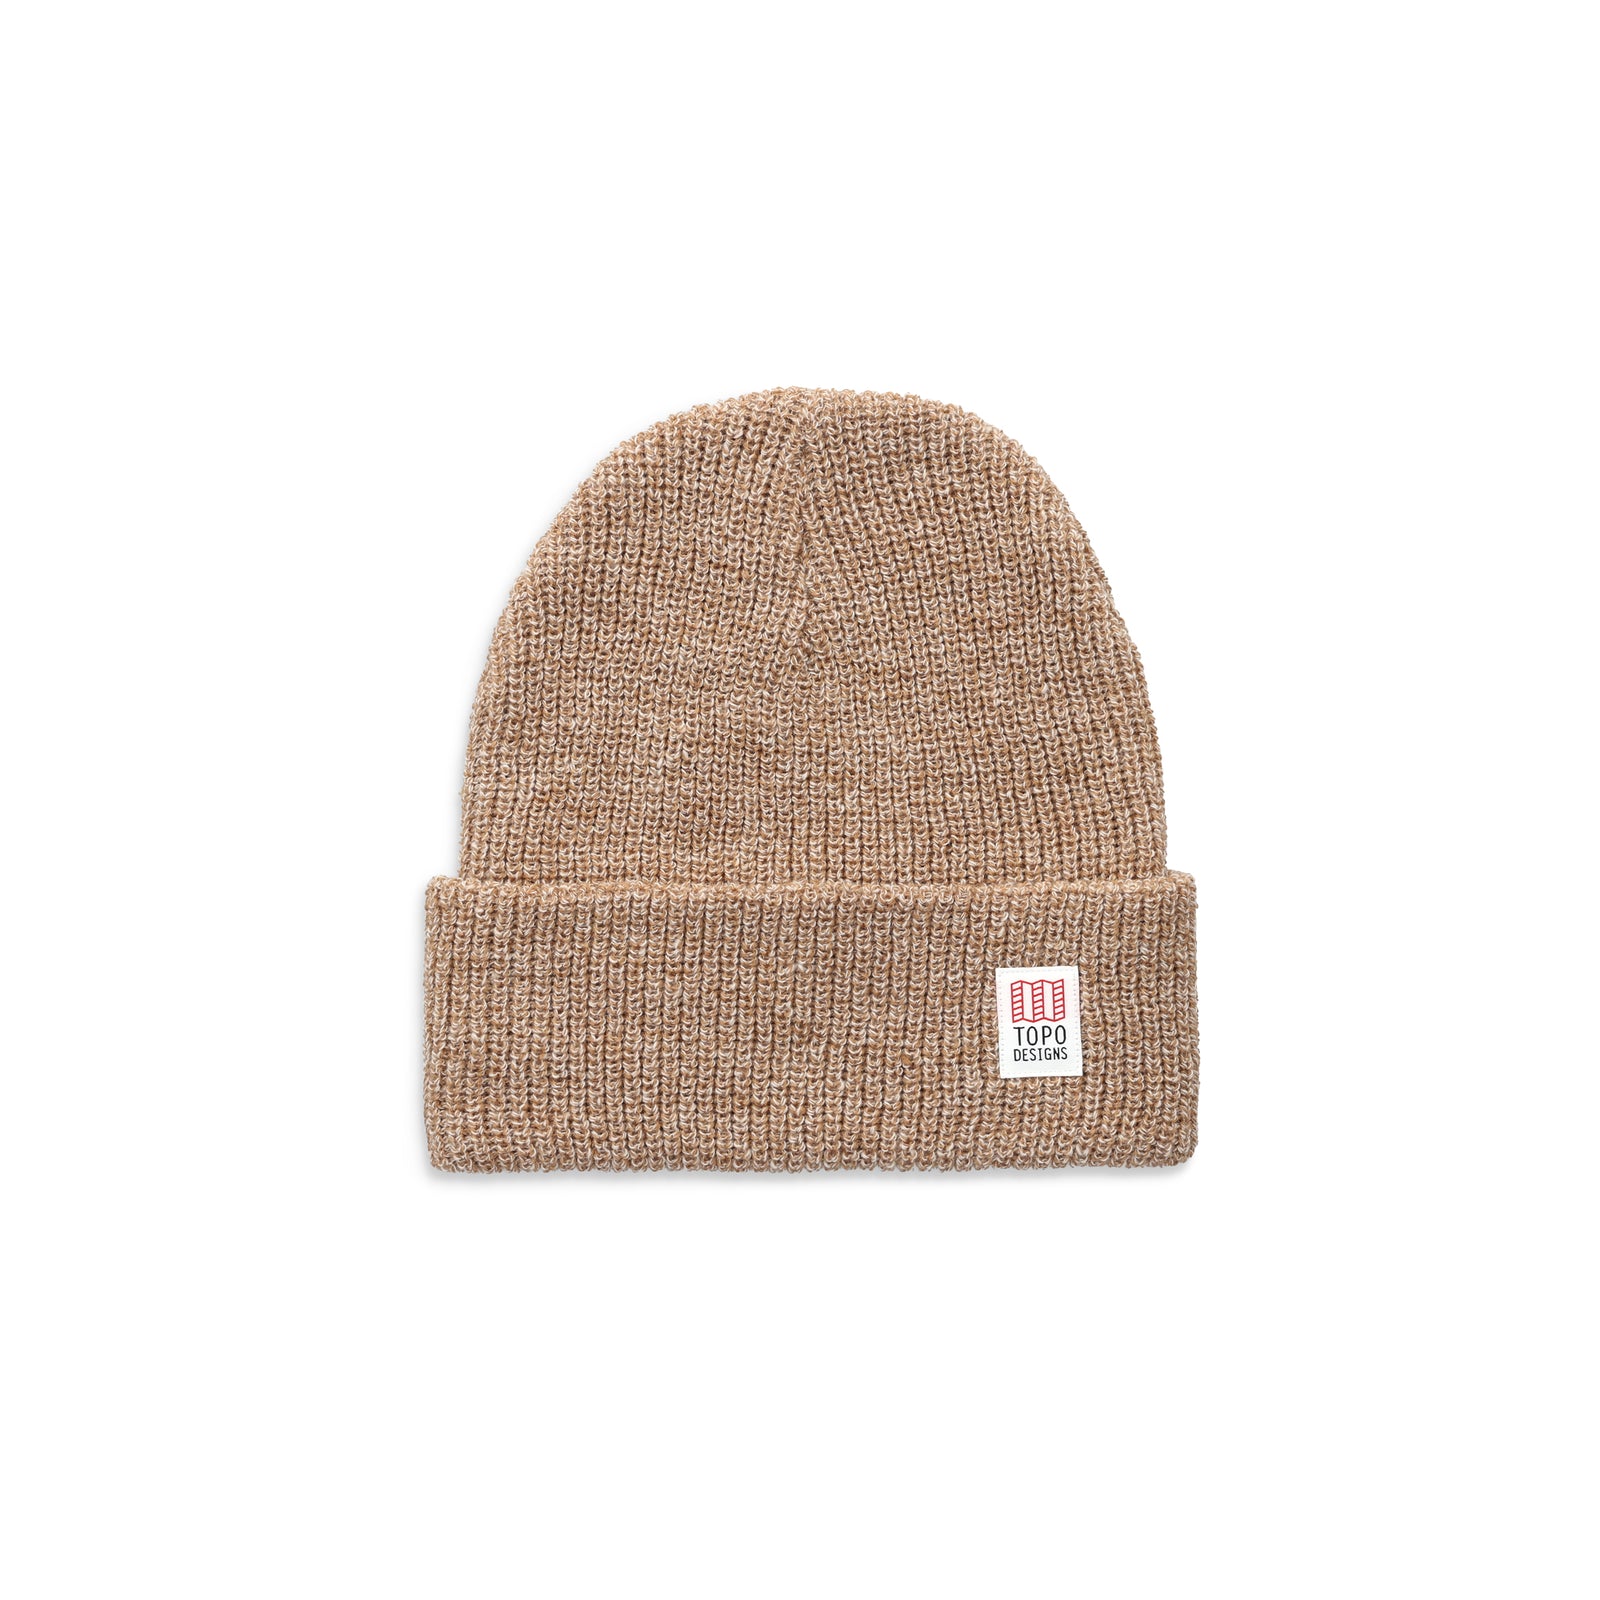 Watch cap in "Natural / Sand Marl"